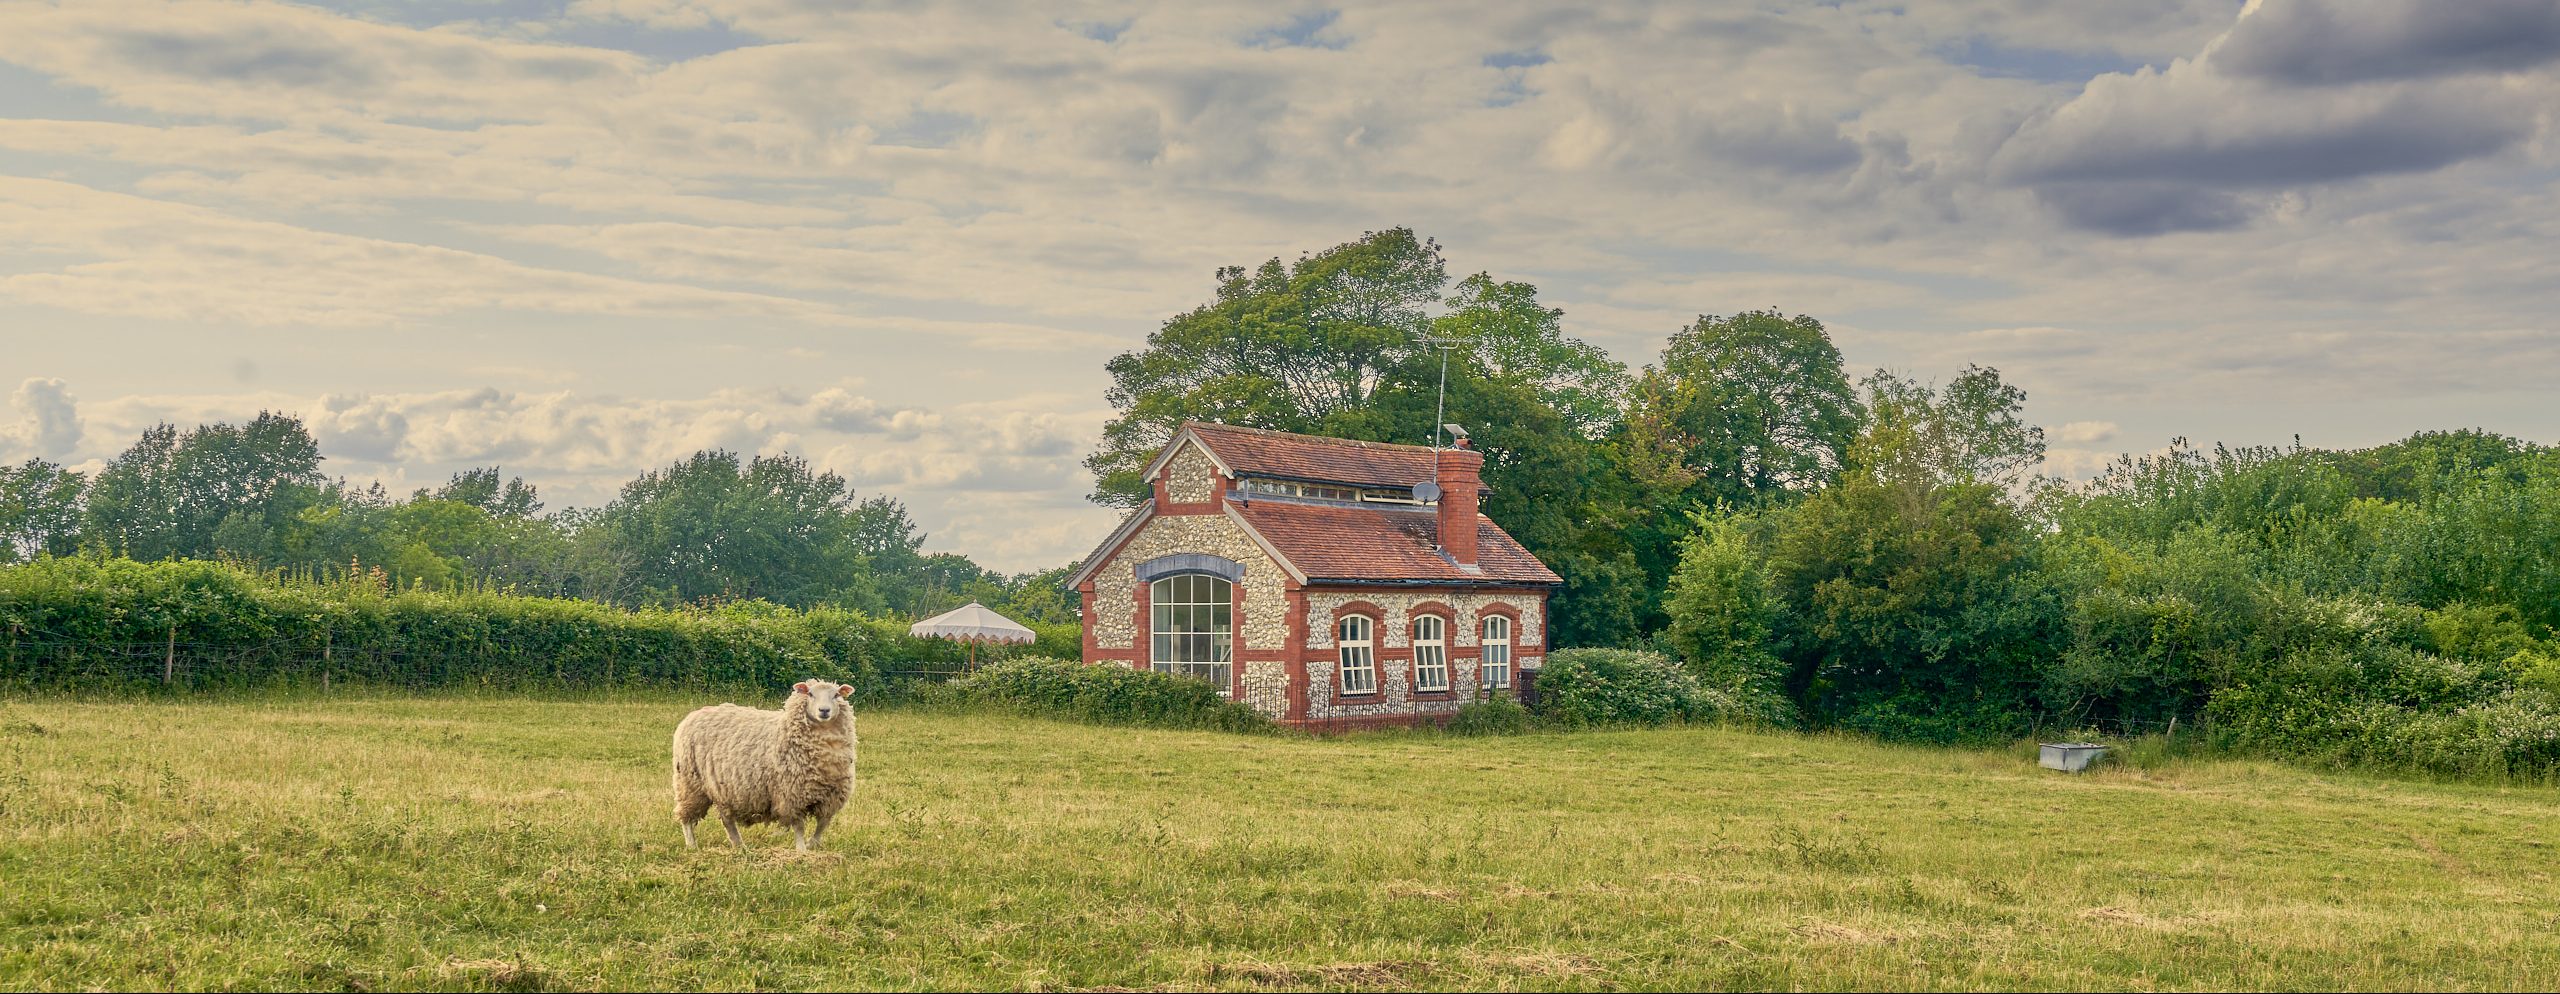 Stay at Wiston - The Pump House